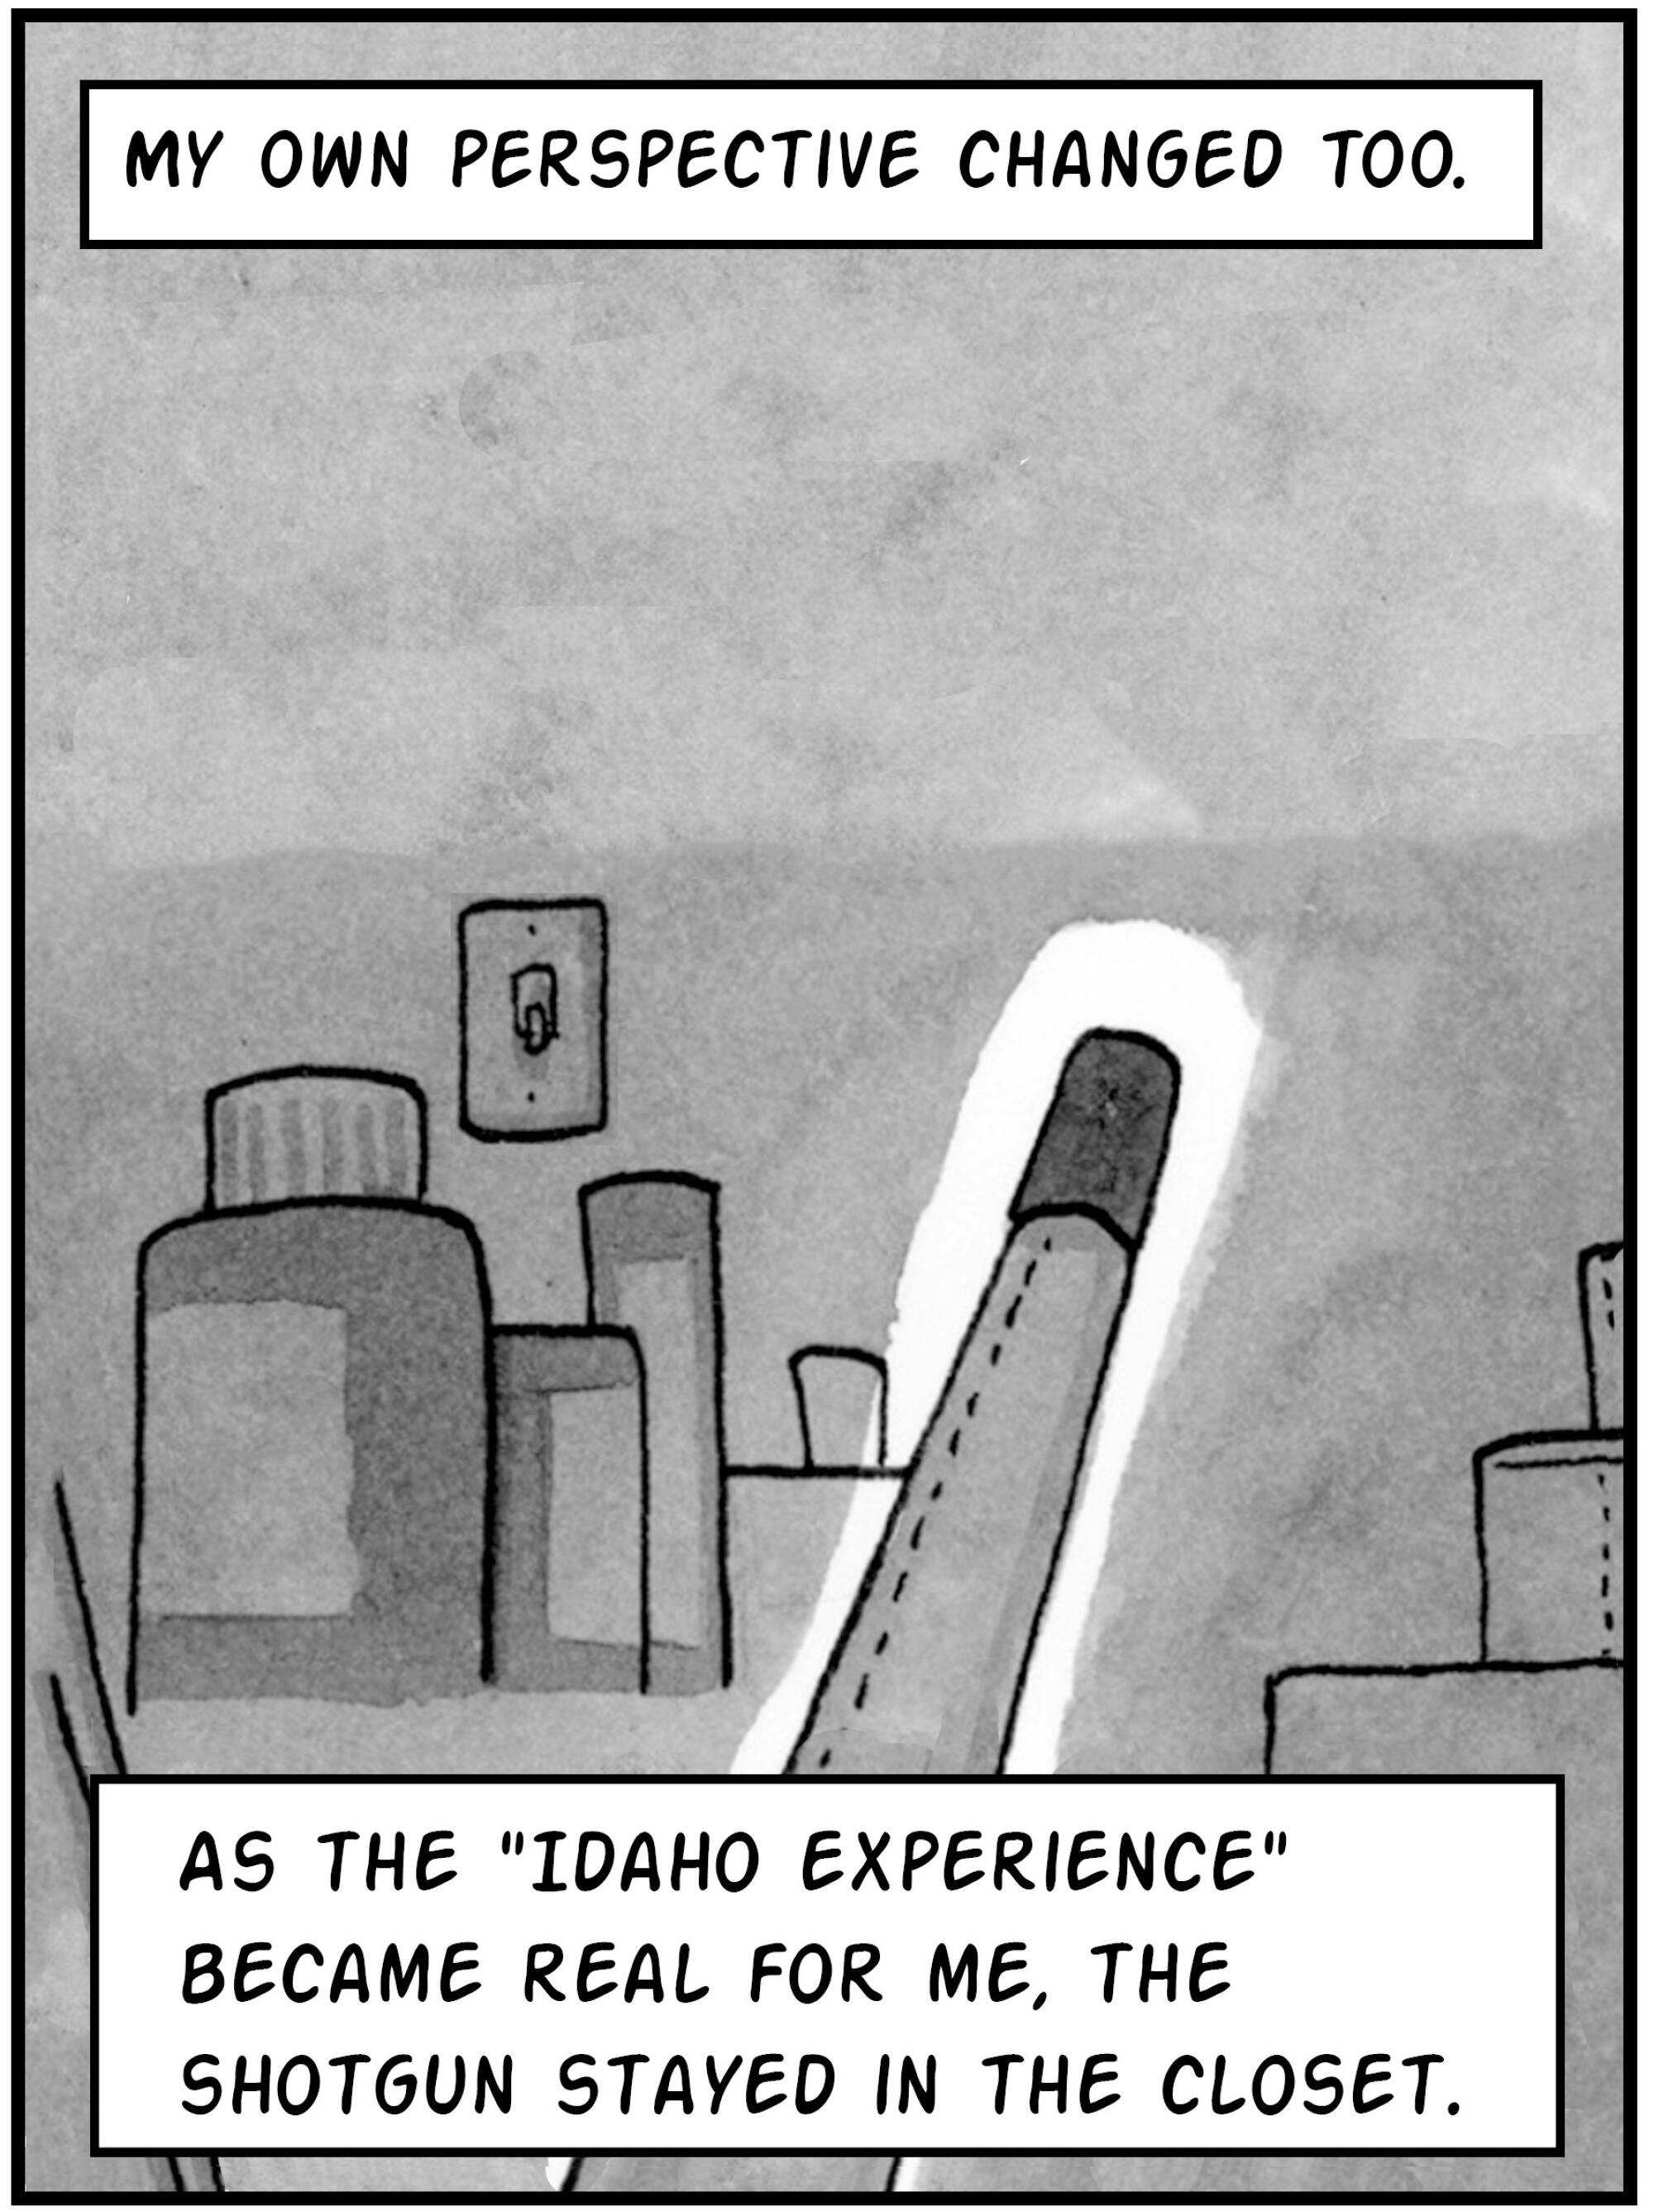 My own perspective changed too. As the "Idaho experience" became real for me, the shotgun stayed in the closet.